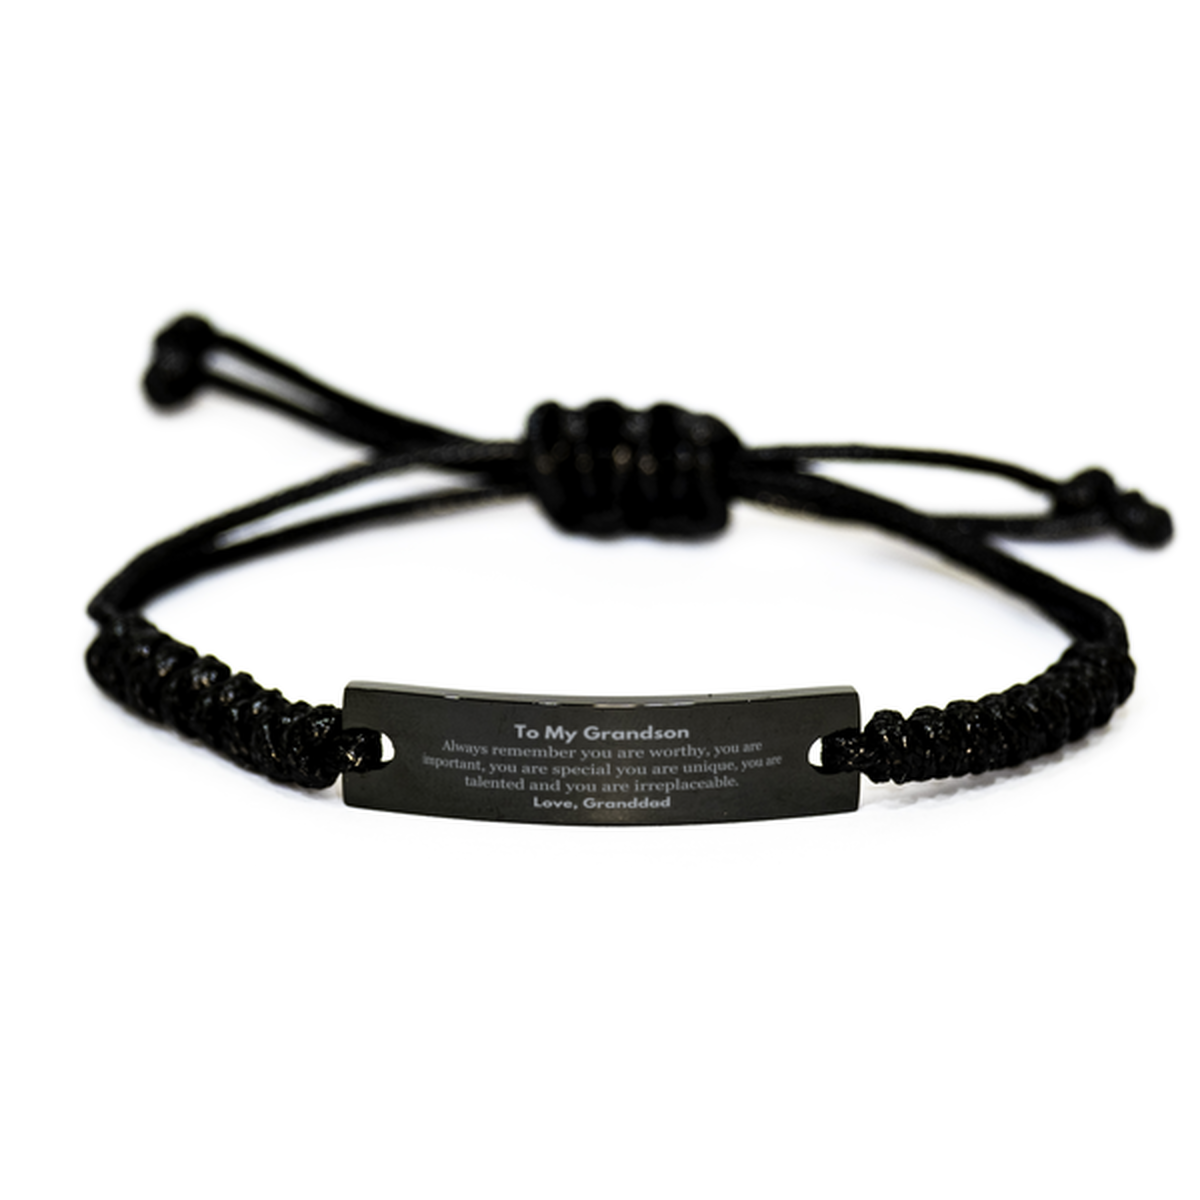 Grandson Birthday Gifts from Granddad, Inspirational Black Rope Bracelet for Grandson Christmas Graduation Gifts for Grandson Always remember you are worthy, you are important. Love, Granddad